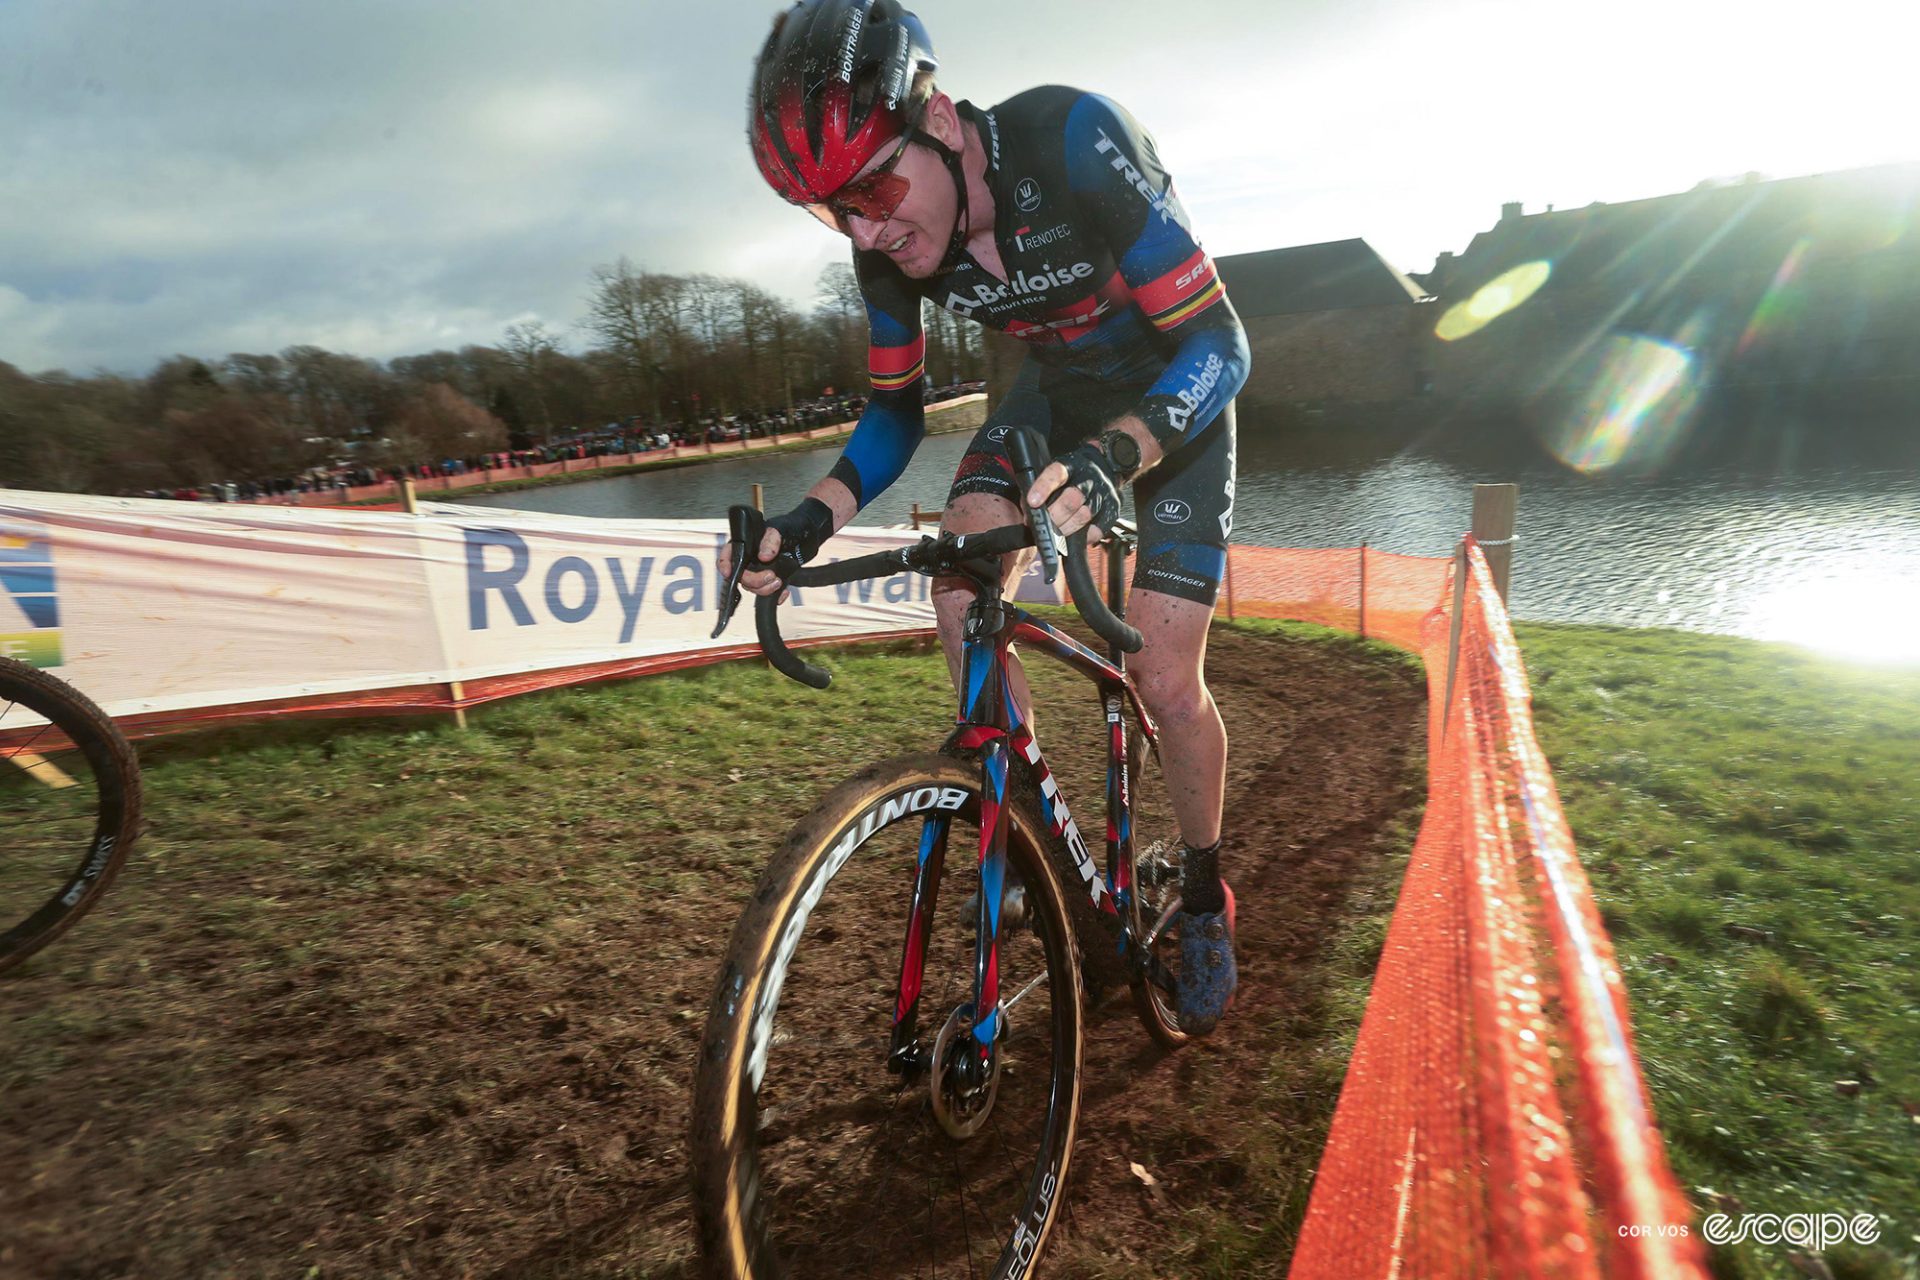 Toon Aerts at the 2022 Flamanville Cyclocross World Cup, where he finished second